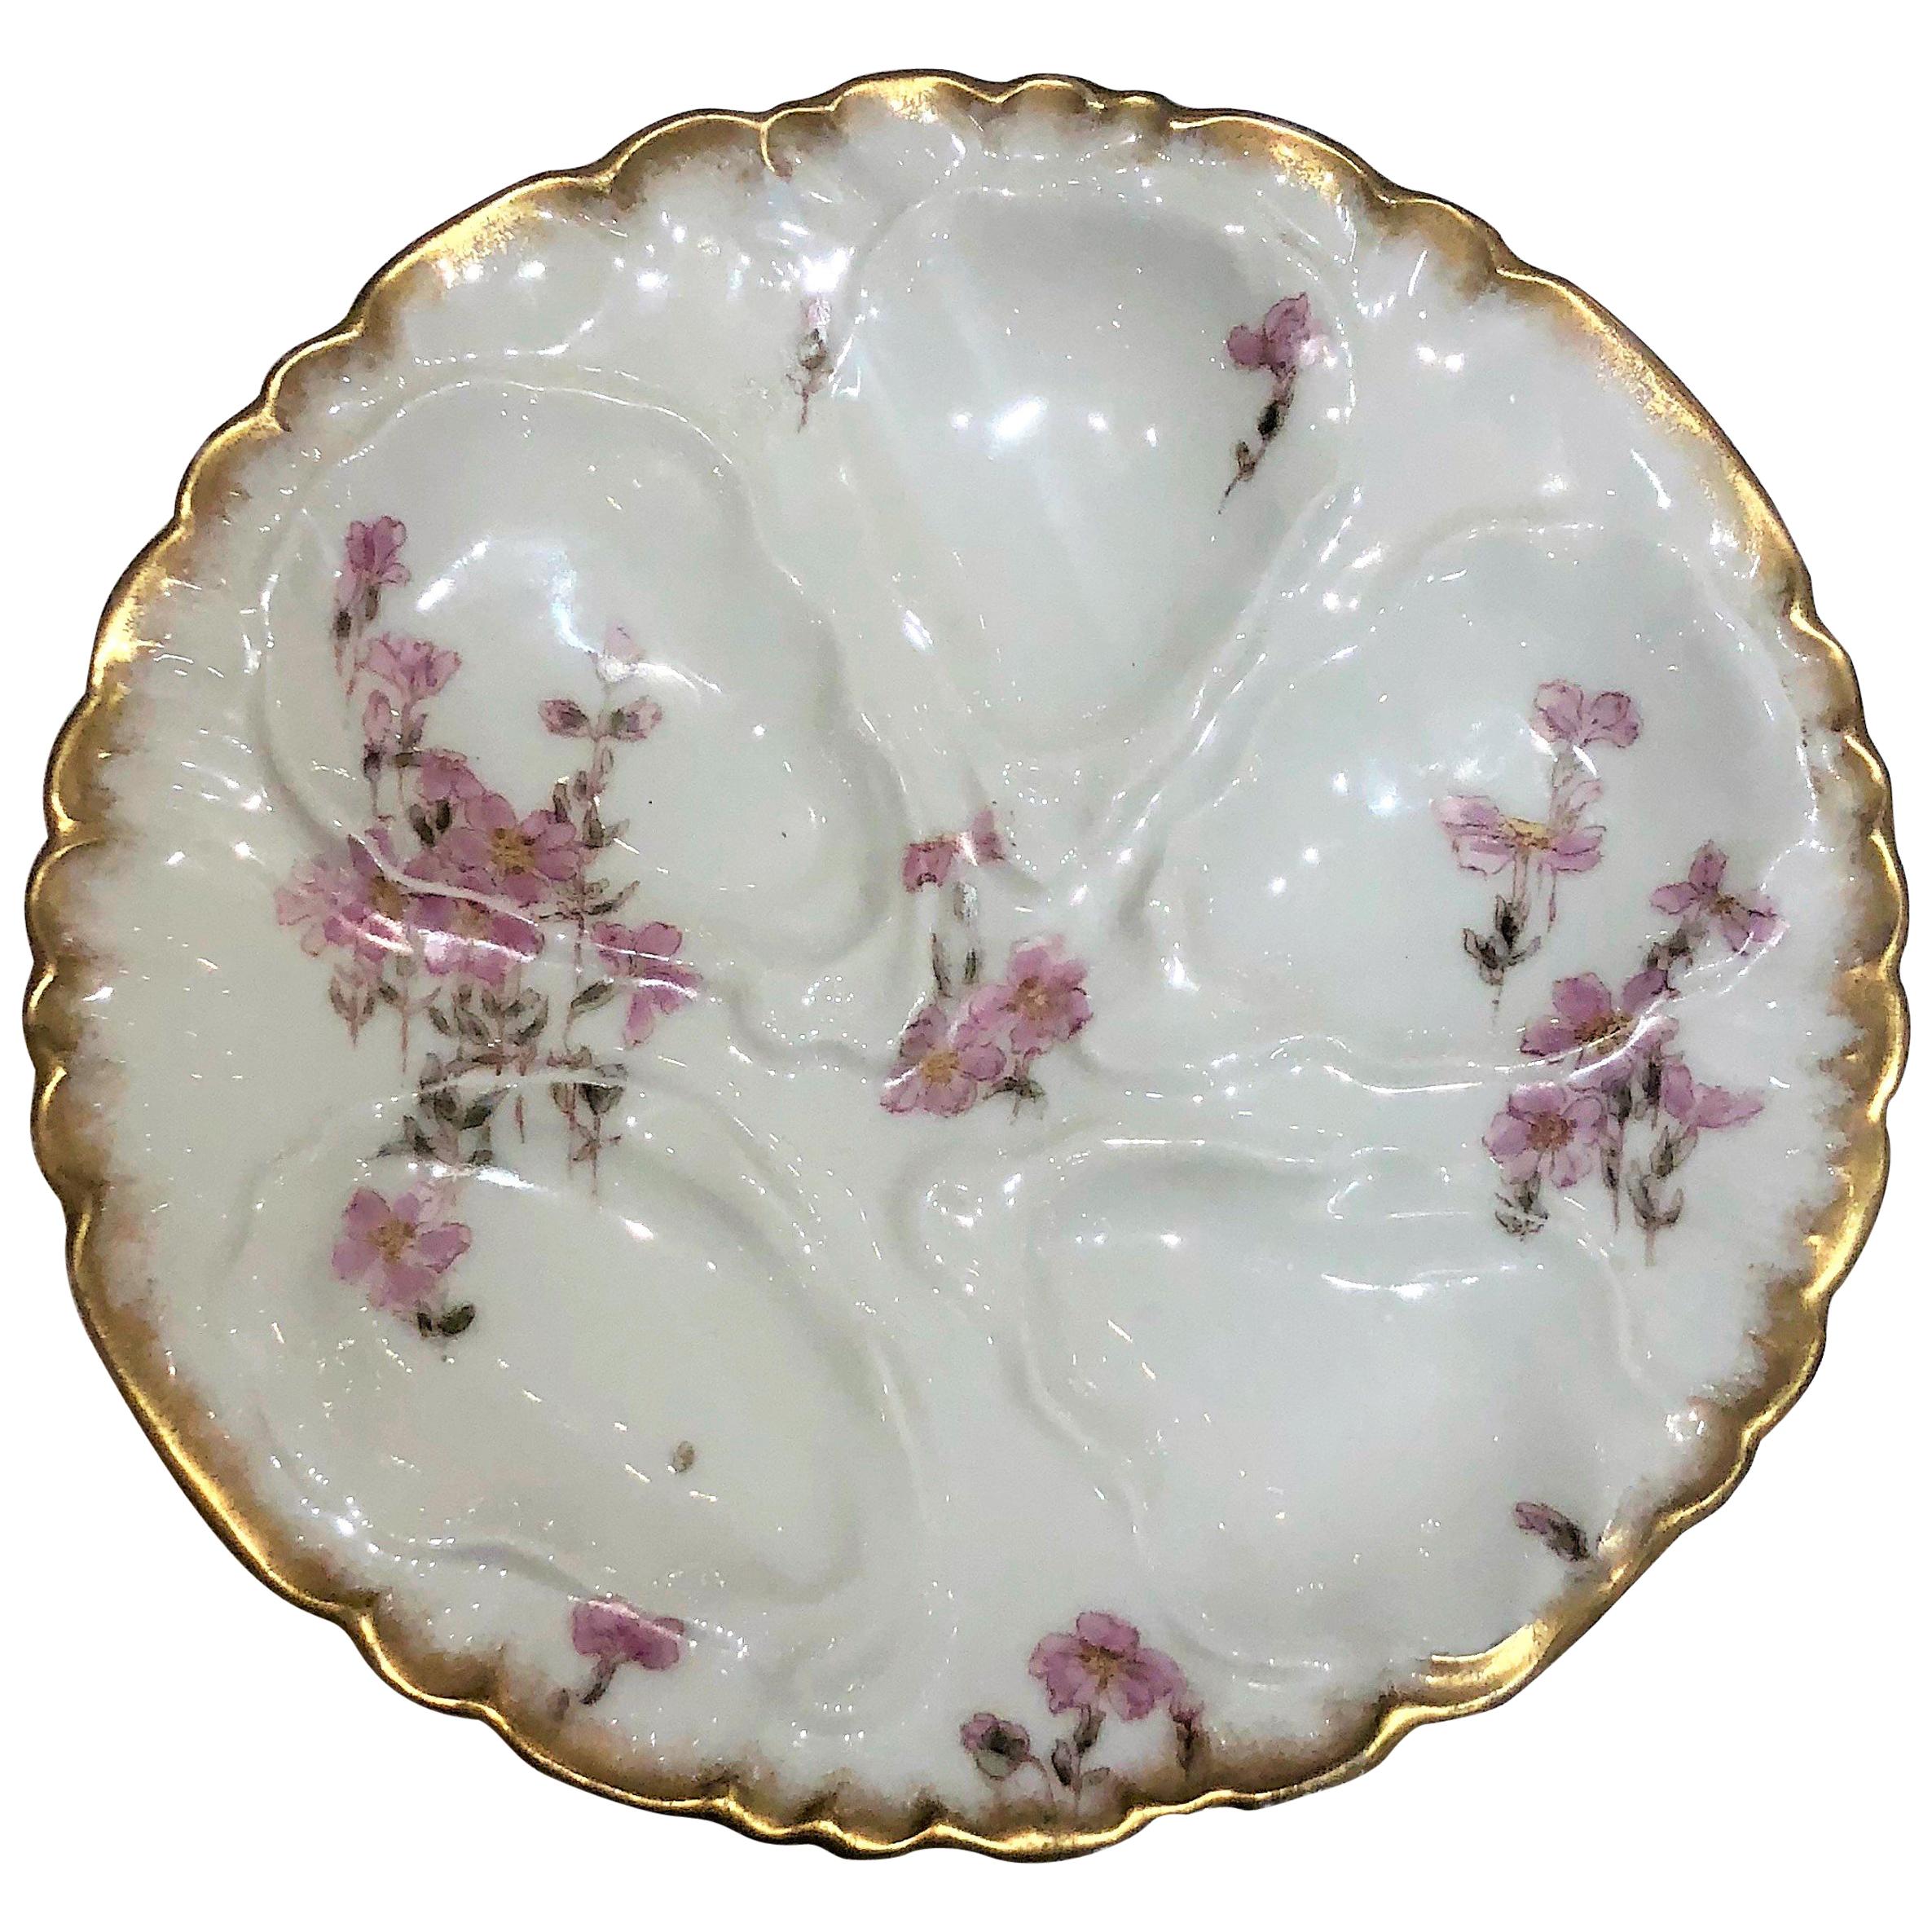 Antique French Haviland Limoges Hand-Painted Porcelain Oyster Plate, circa 1890